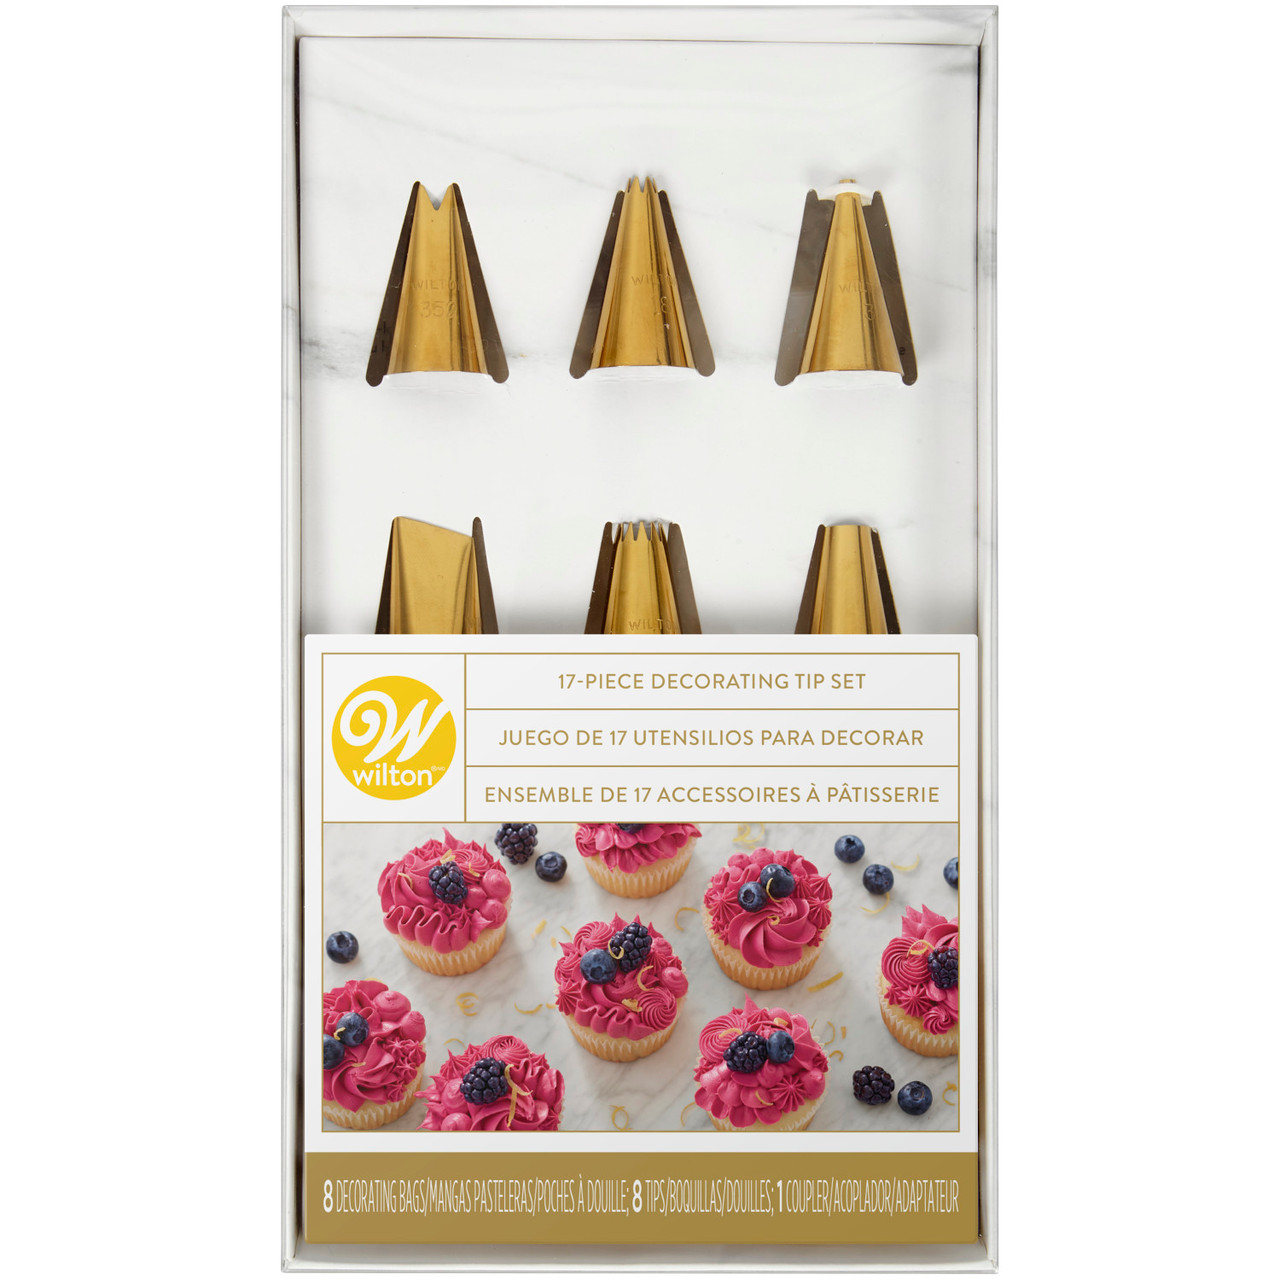 Navy Blue and Gold Piping Tips and Cake Decorating Supplies Set